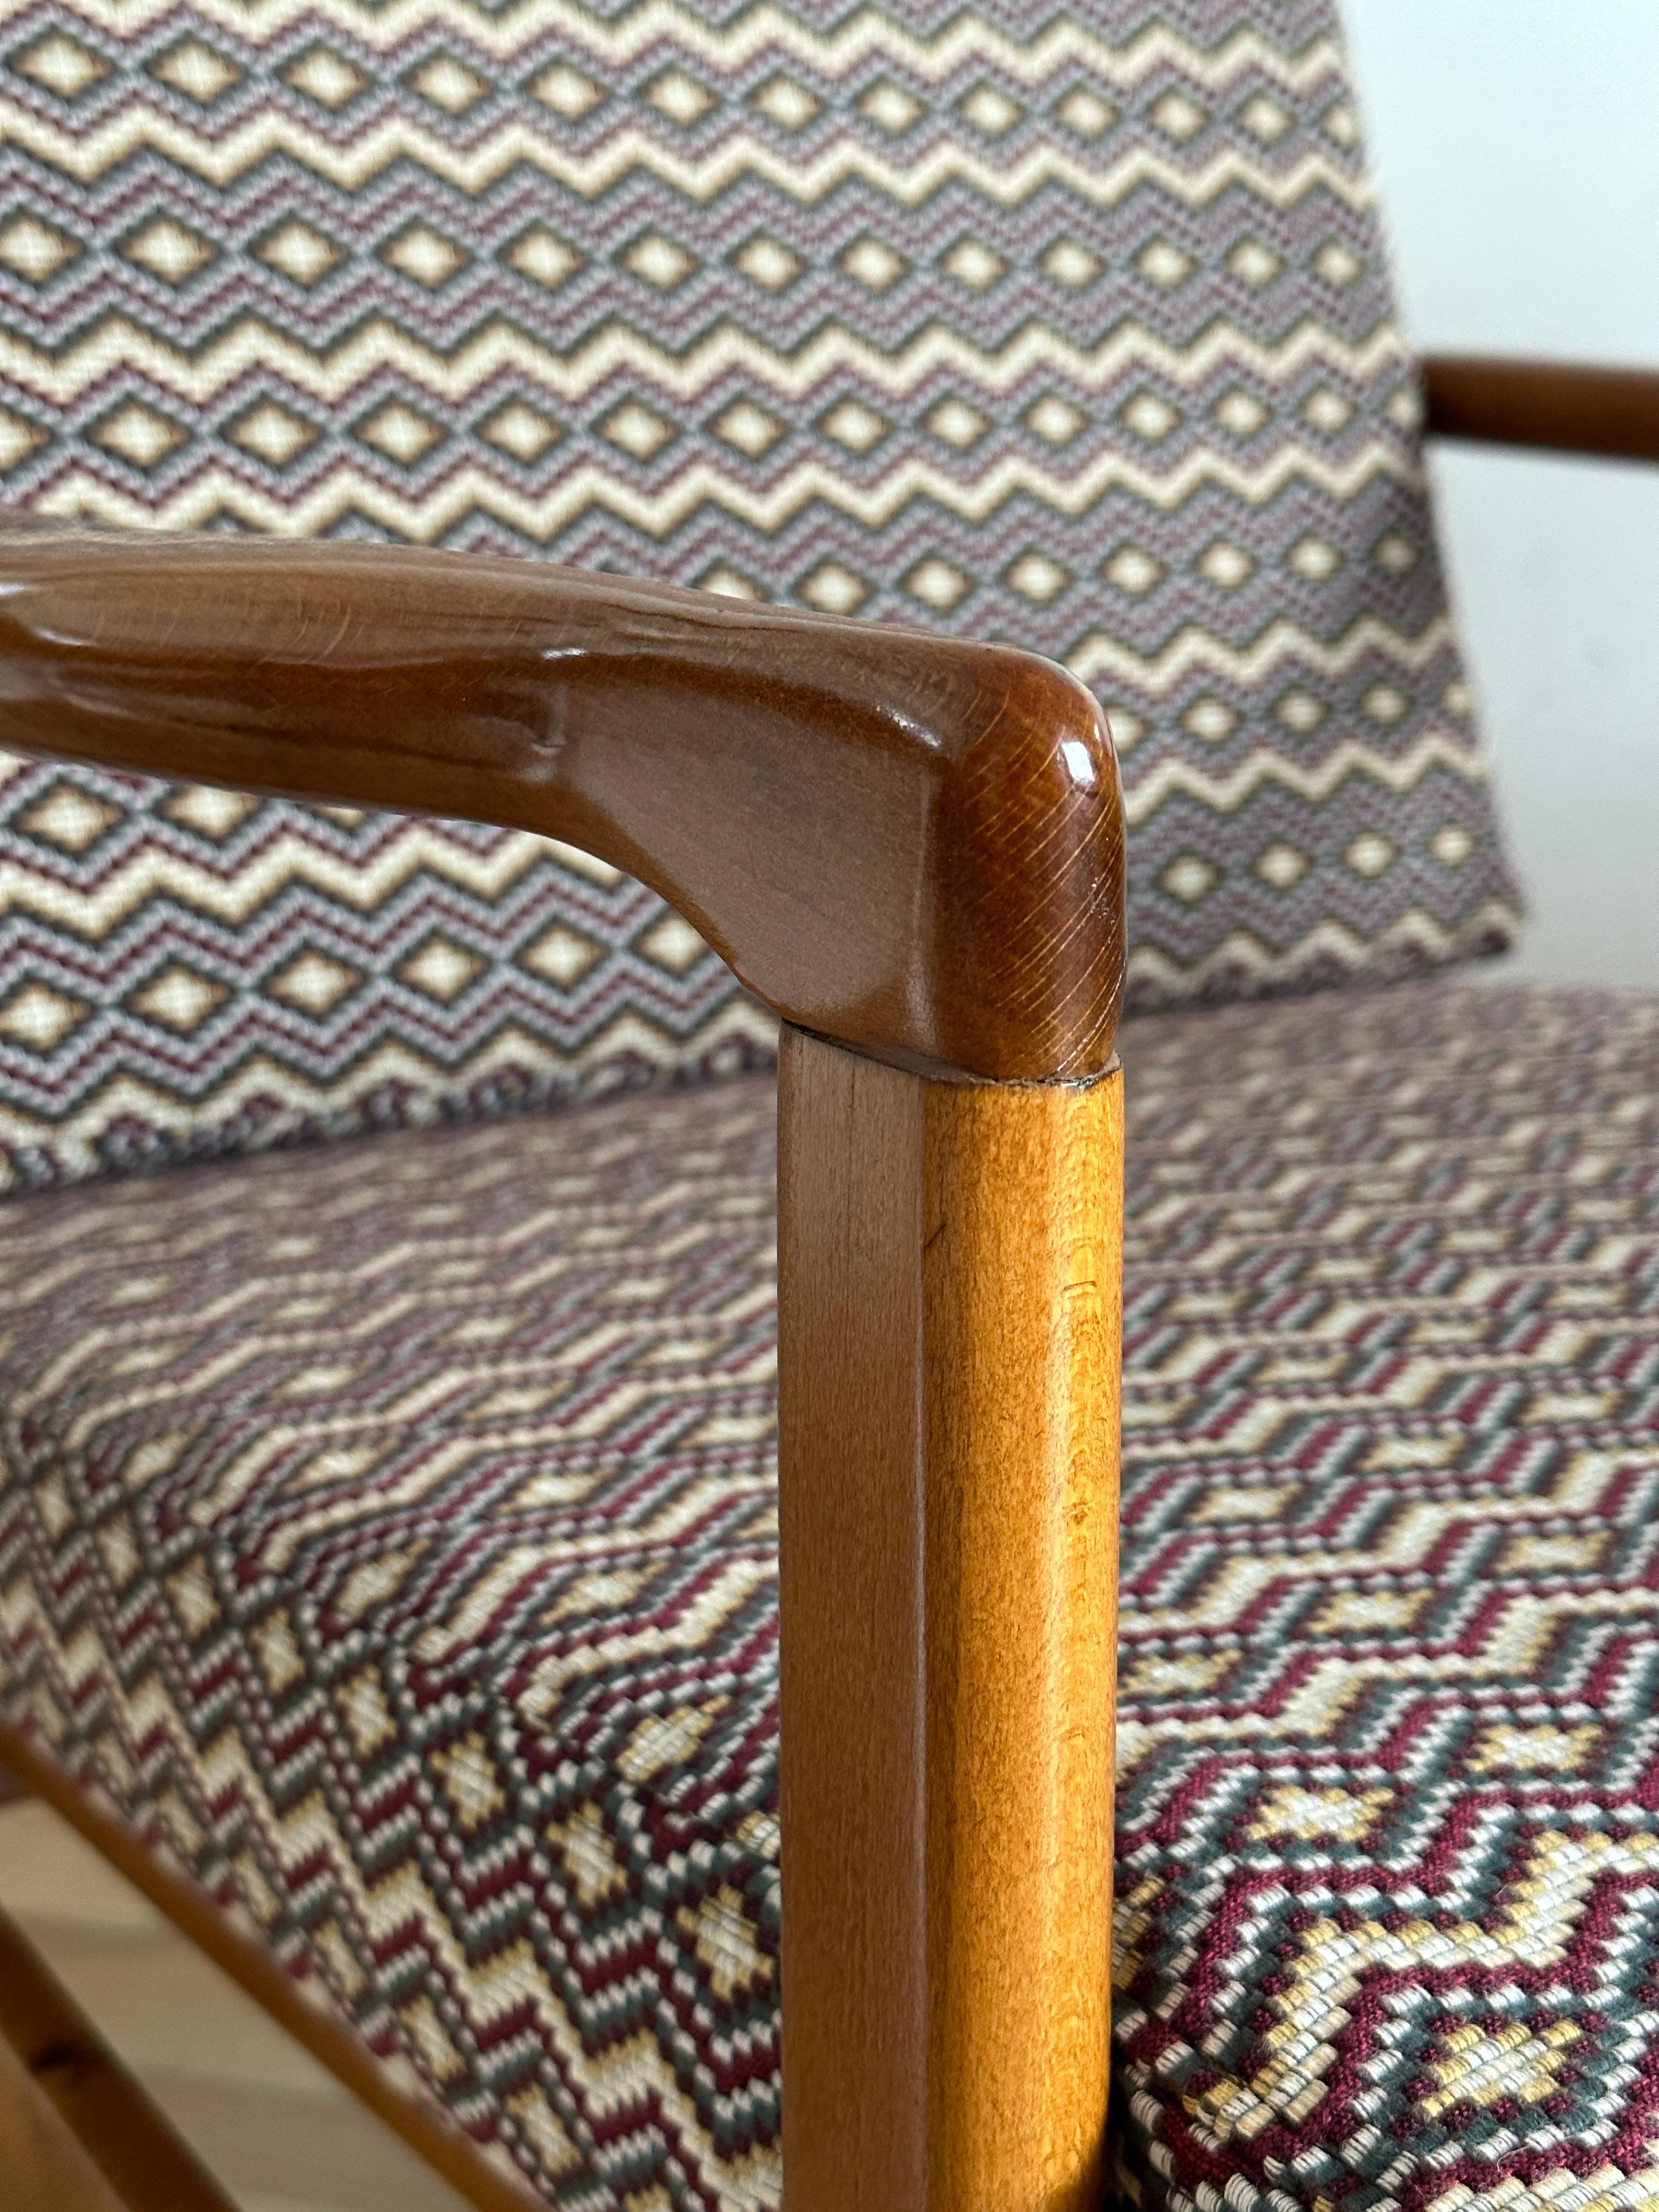 Midcentury Armchair, in Geometric and Ethnic Fabric, Europe, 1960s For Sale 5